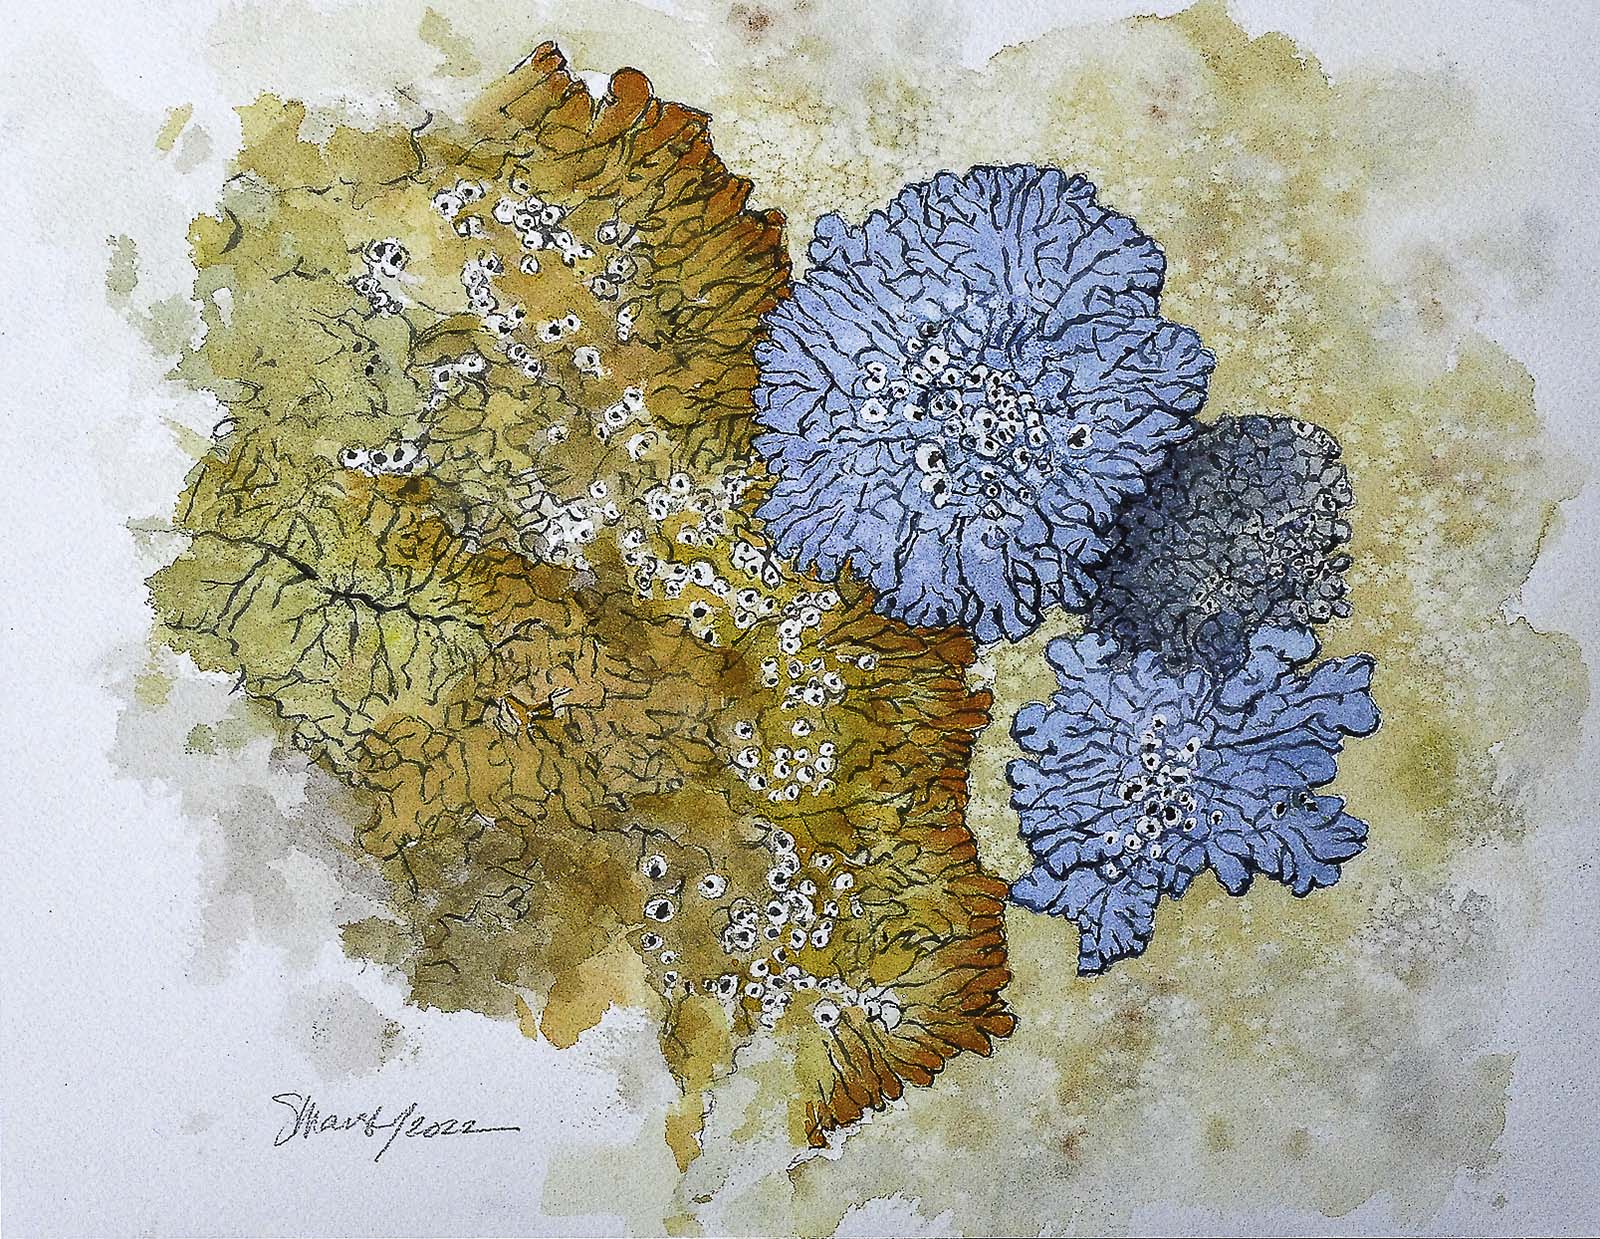 Susan Marsh, ‘O Pioneers!,’ 2022. Watercolor on rag paper, 11 by 14in. Image courtesy of the National Museum of Wildlife Art